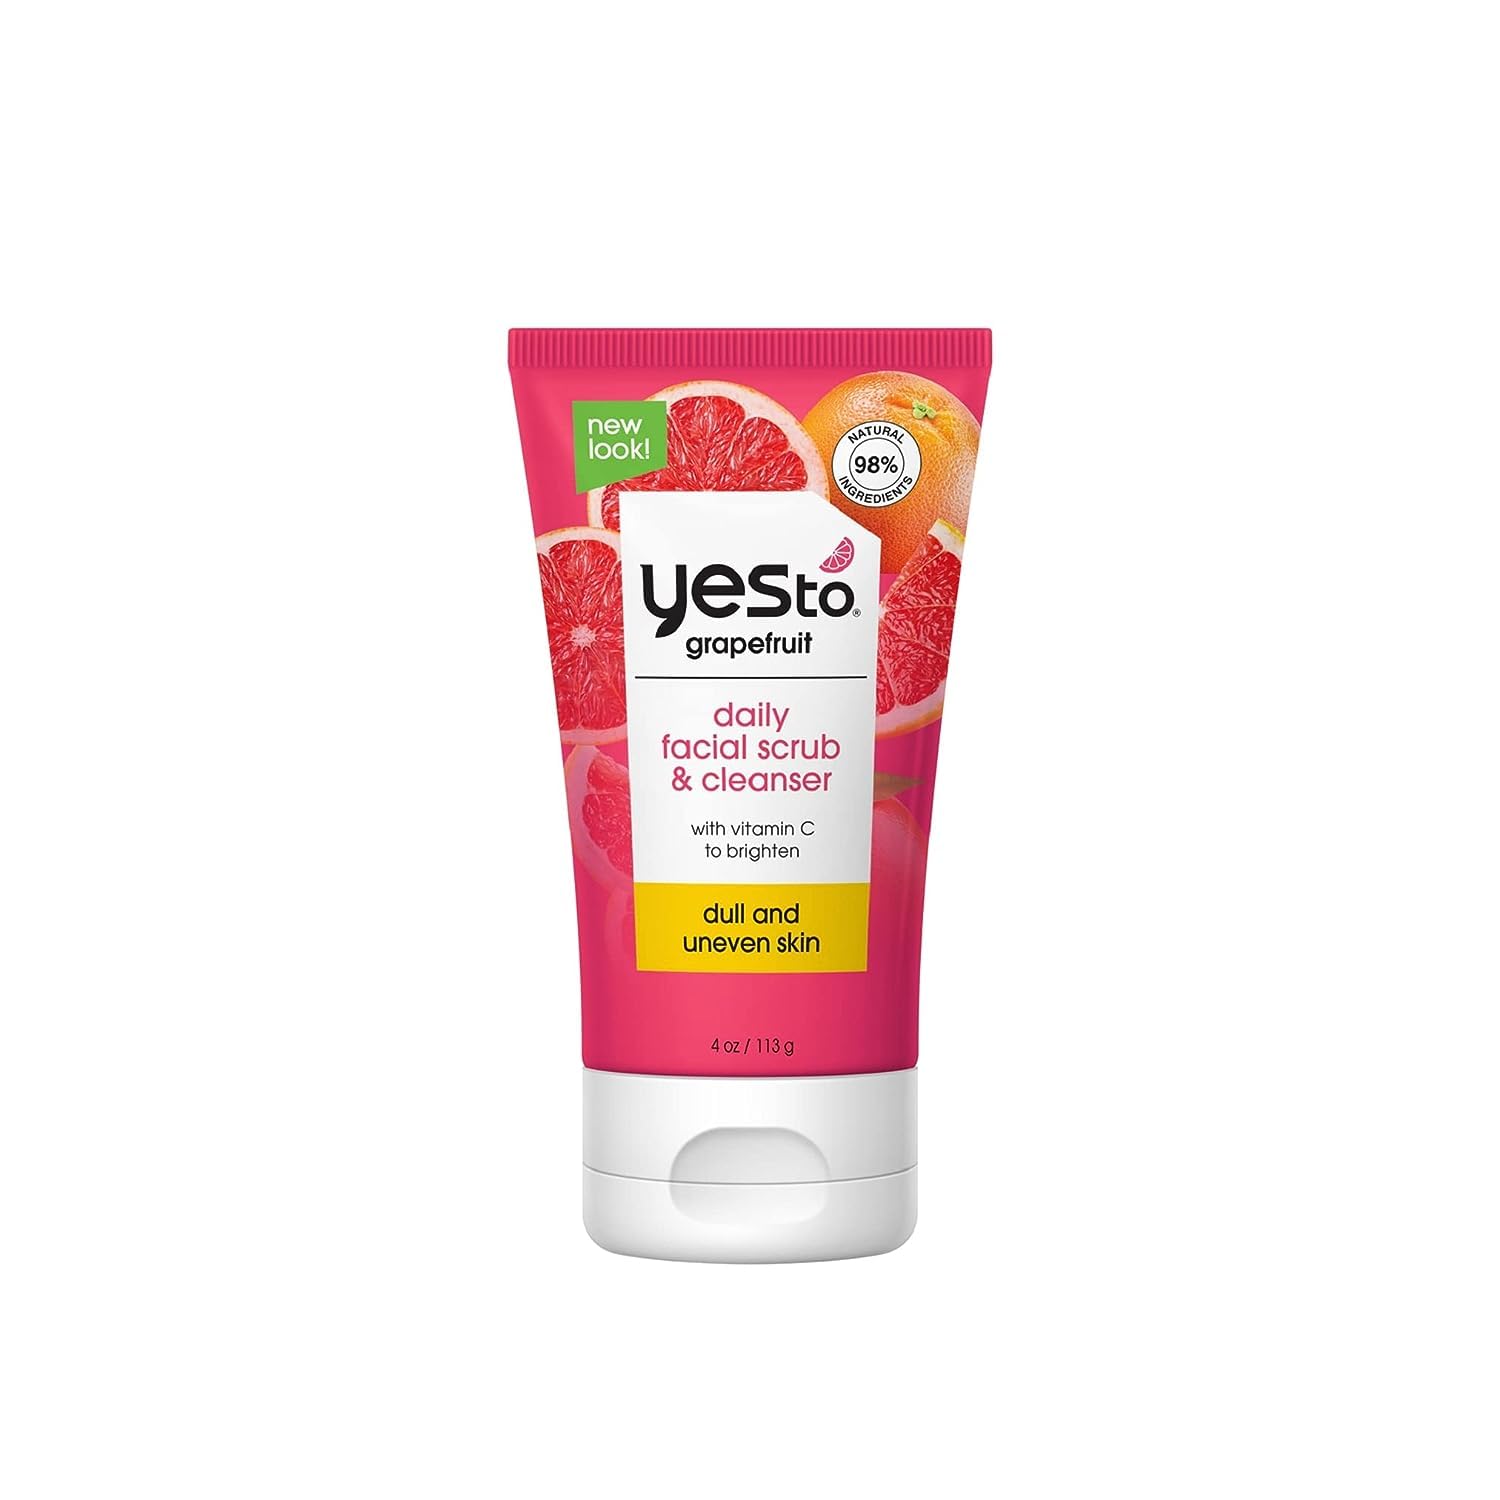 Yes To Grapefruit Daily Facial Scrub & Cleanser, Natural, Vegan & Cruelty Free, 4 Oz